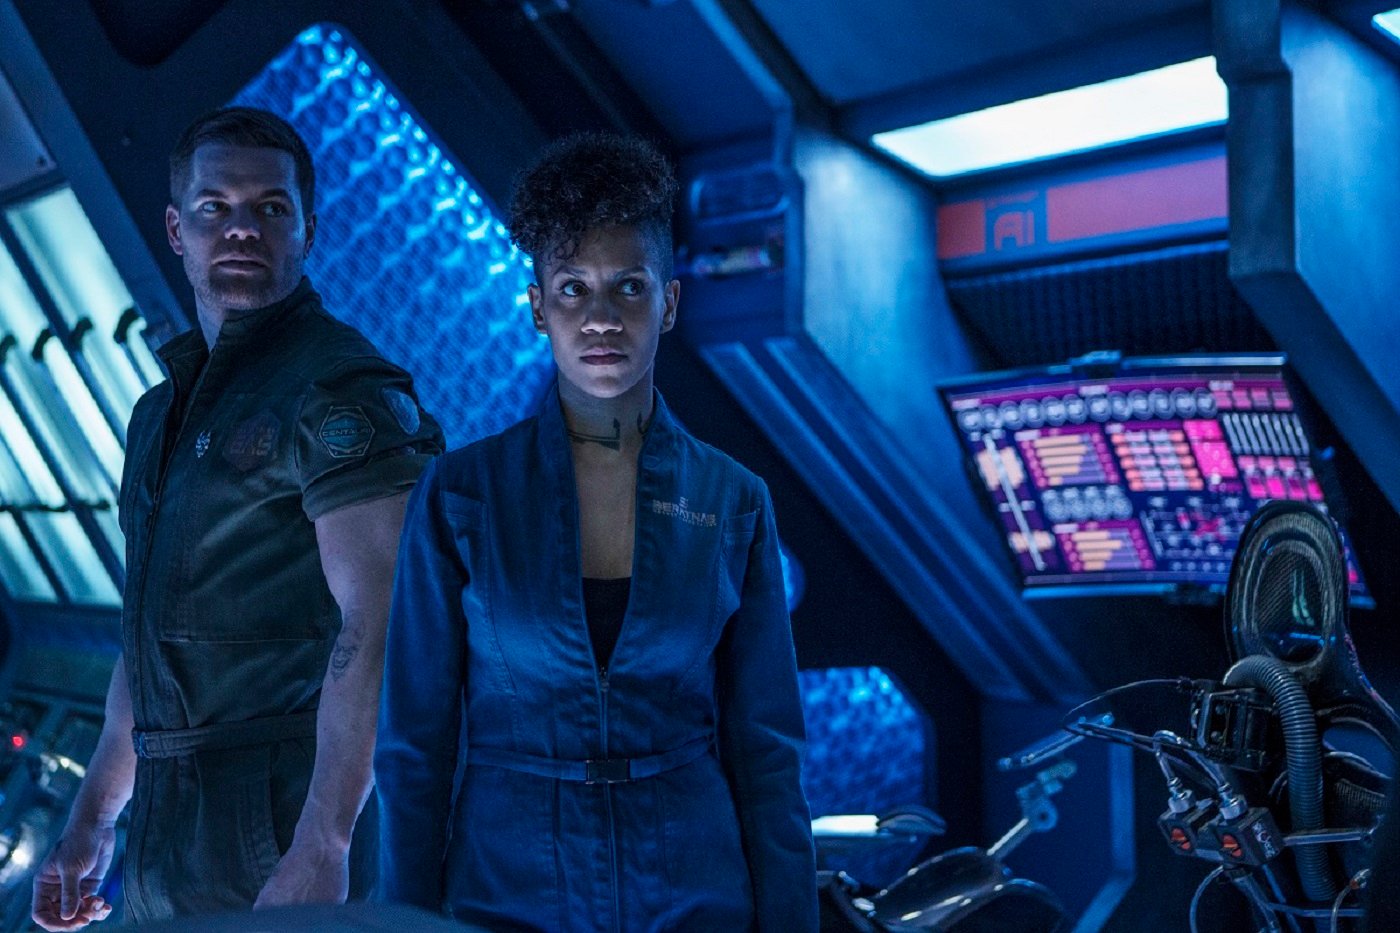 'The Expanse' stars Wes Chatham as Amos Burton and Dominique Tipper as Naomi Nagata